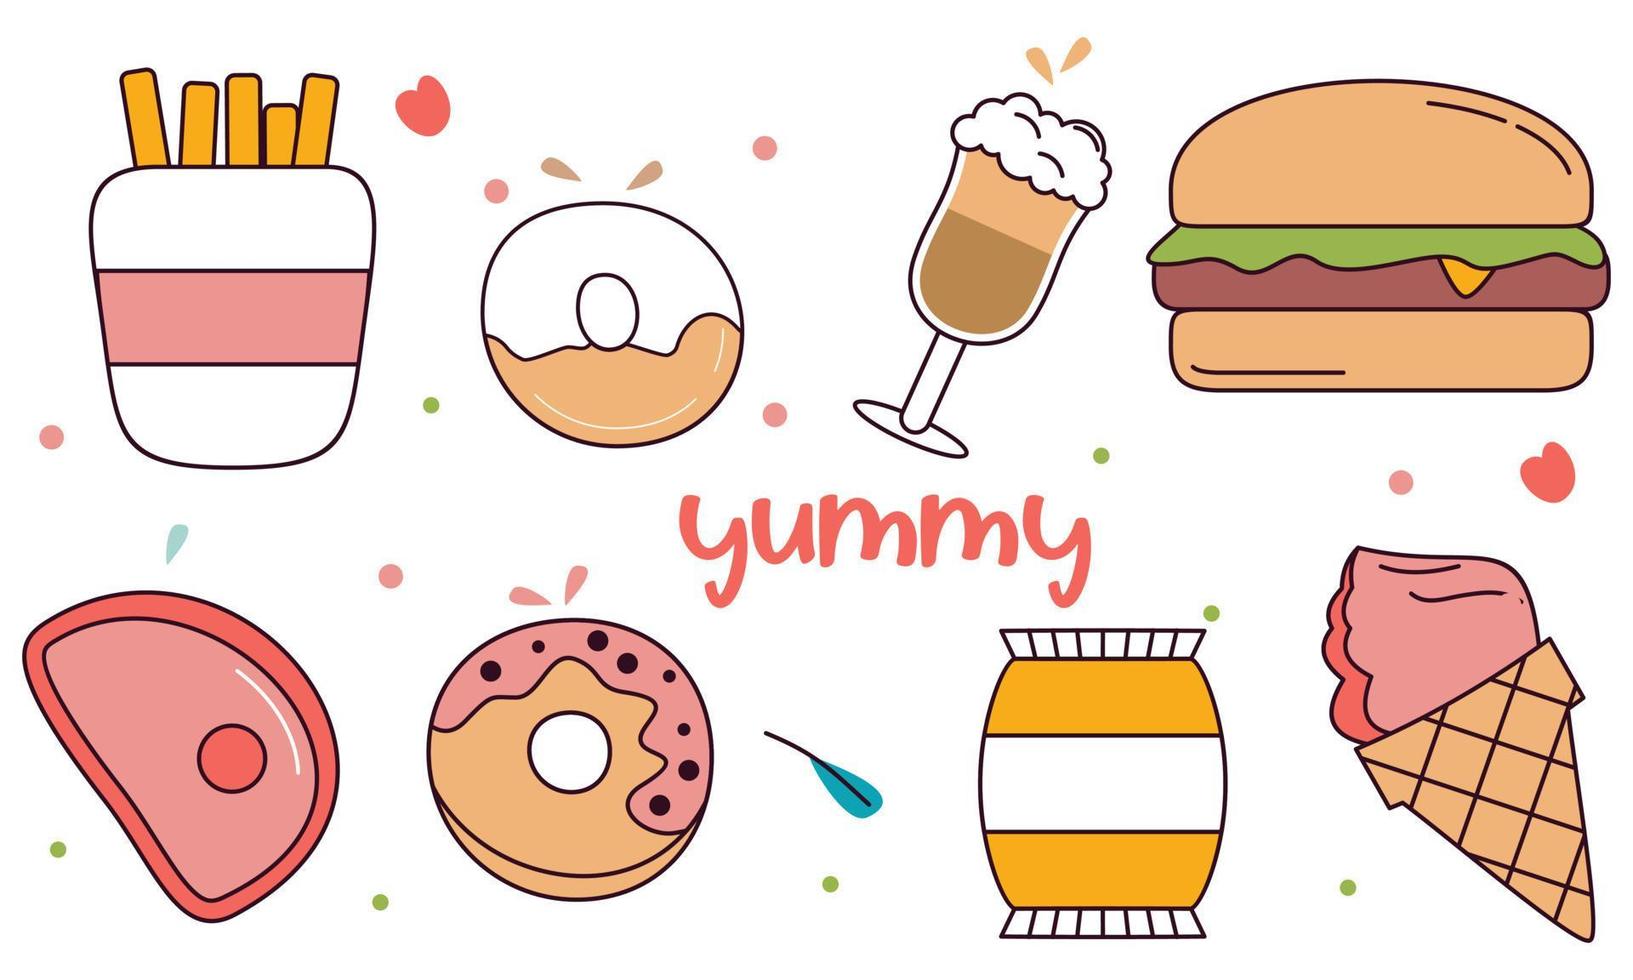 Fast food doodle hand drawn line art style object elements vector